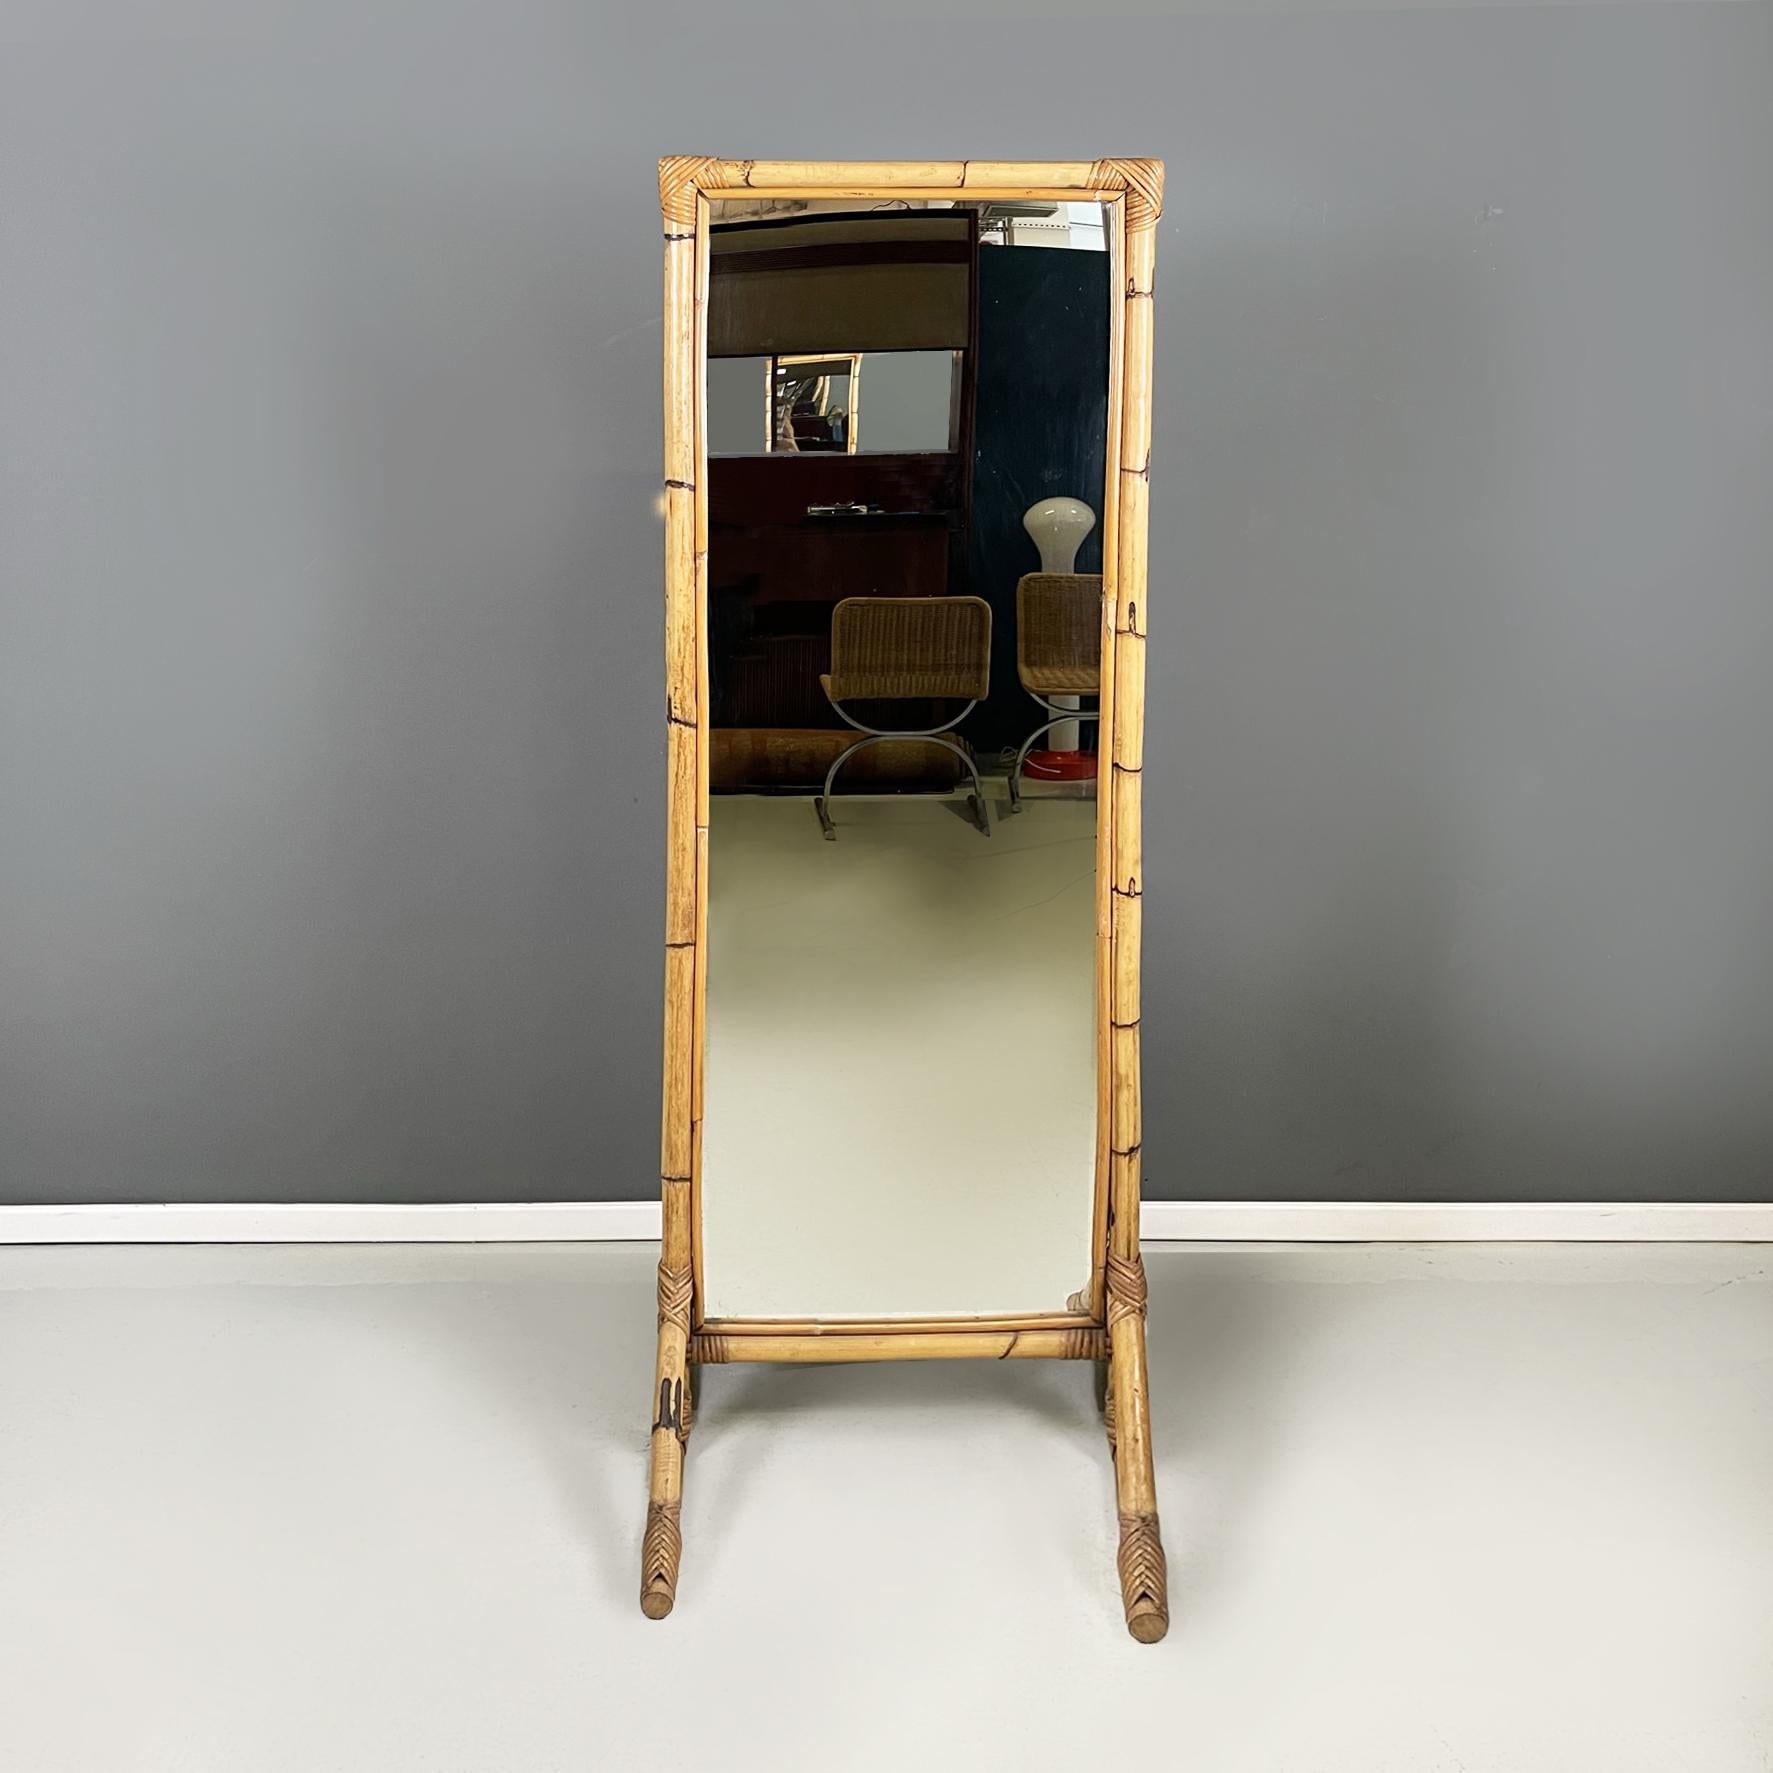 Italian mid-century modern Floor freestanding full-length rattan mirror, 1960s
Full-length rectangular self-supporting floor mirror, with rattan structure. It features woven detailing at the corners. The two rattan legs are triangular in shape. The